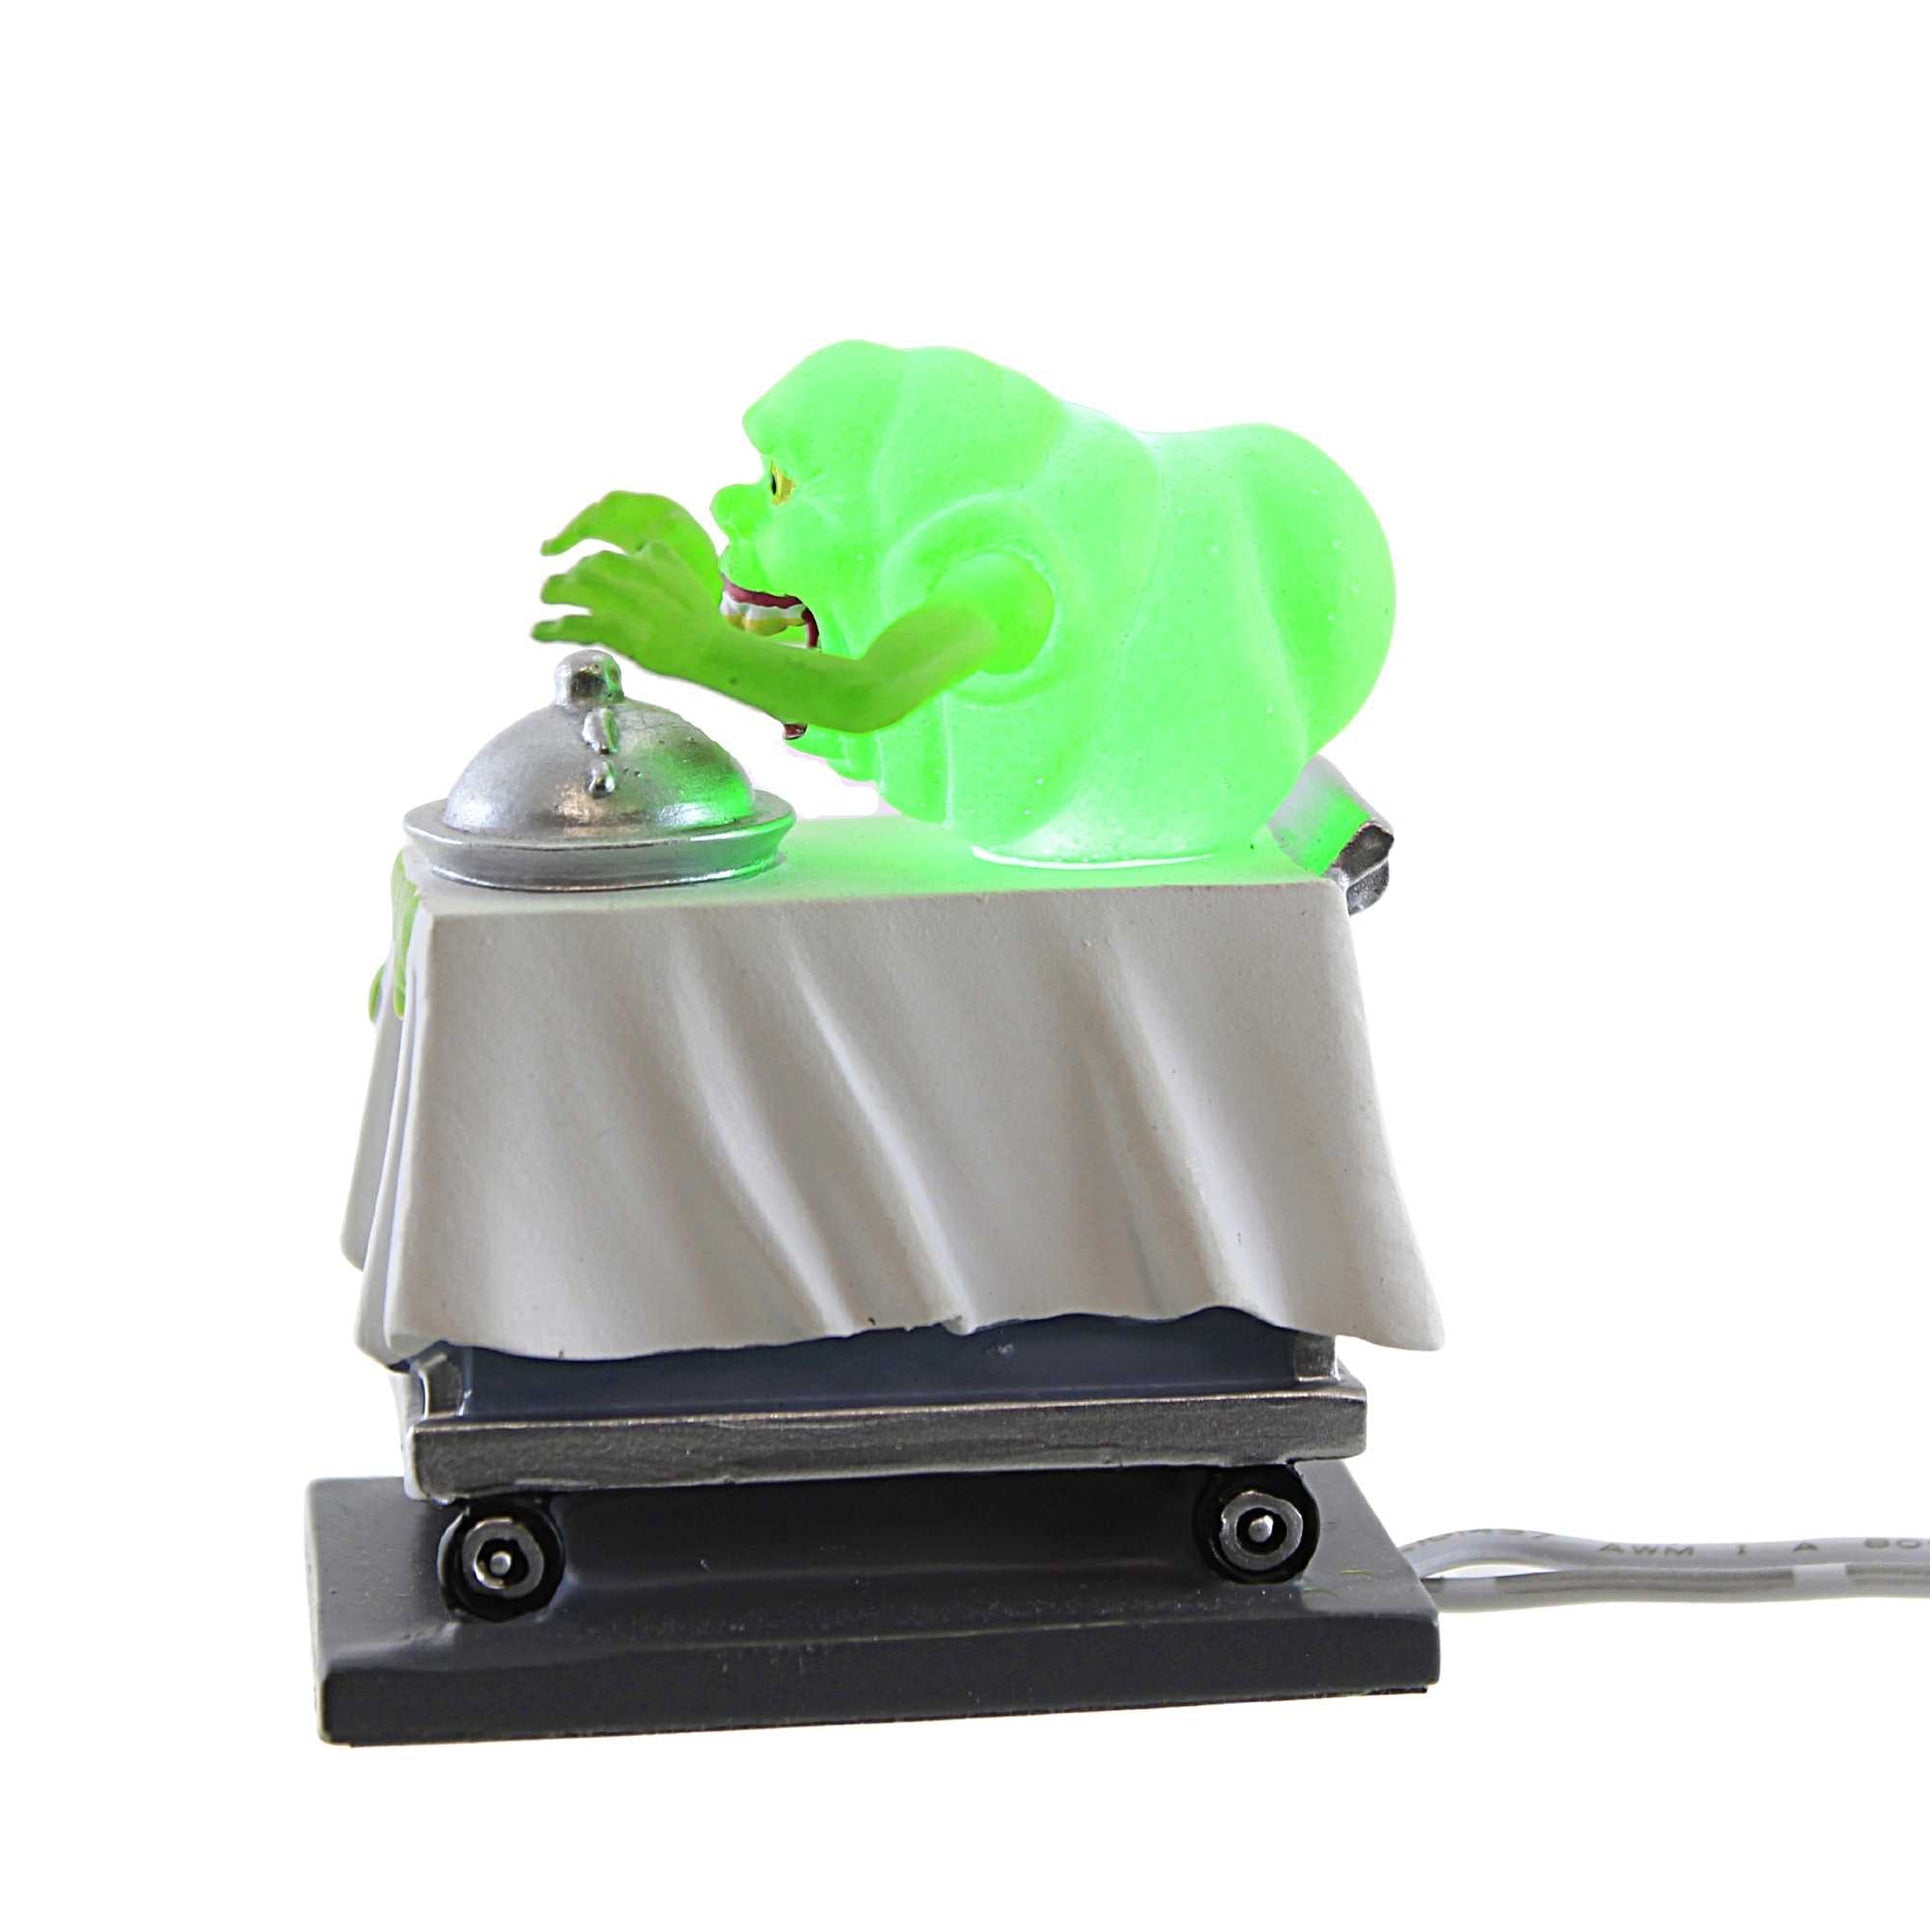 Department 56 Ghostbusters Village Accessories Slimer on Meal Cart Lit Figurine, 2.56" H